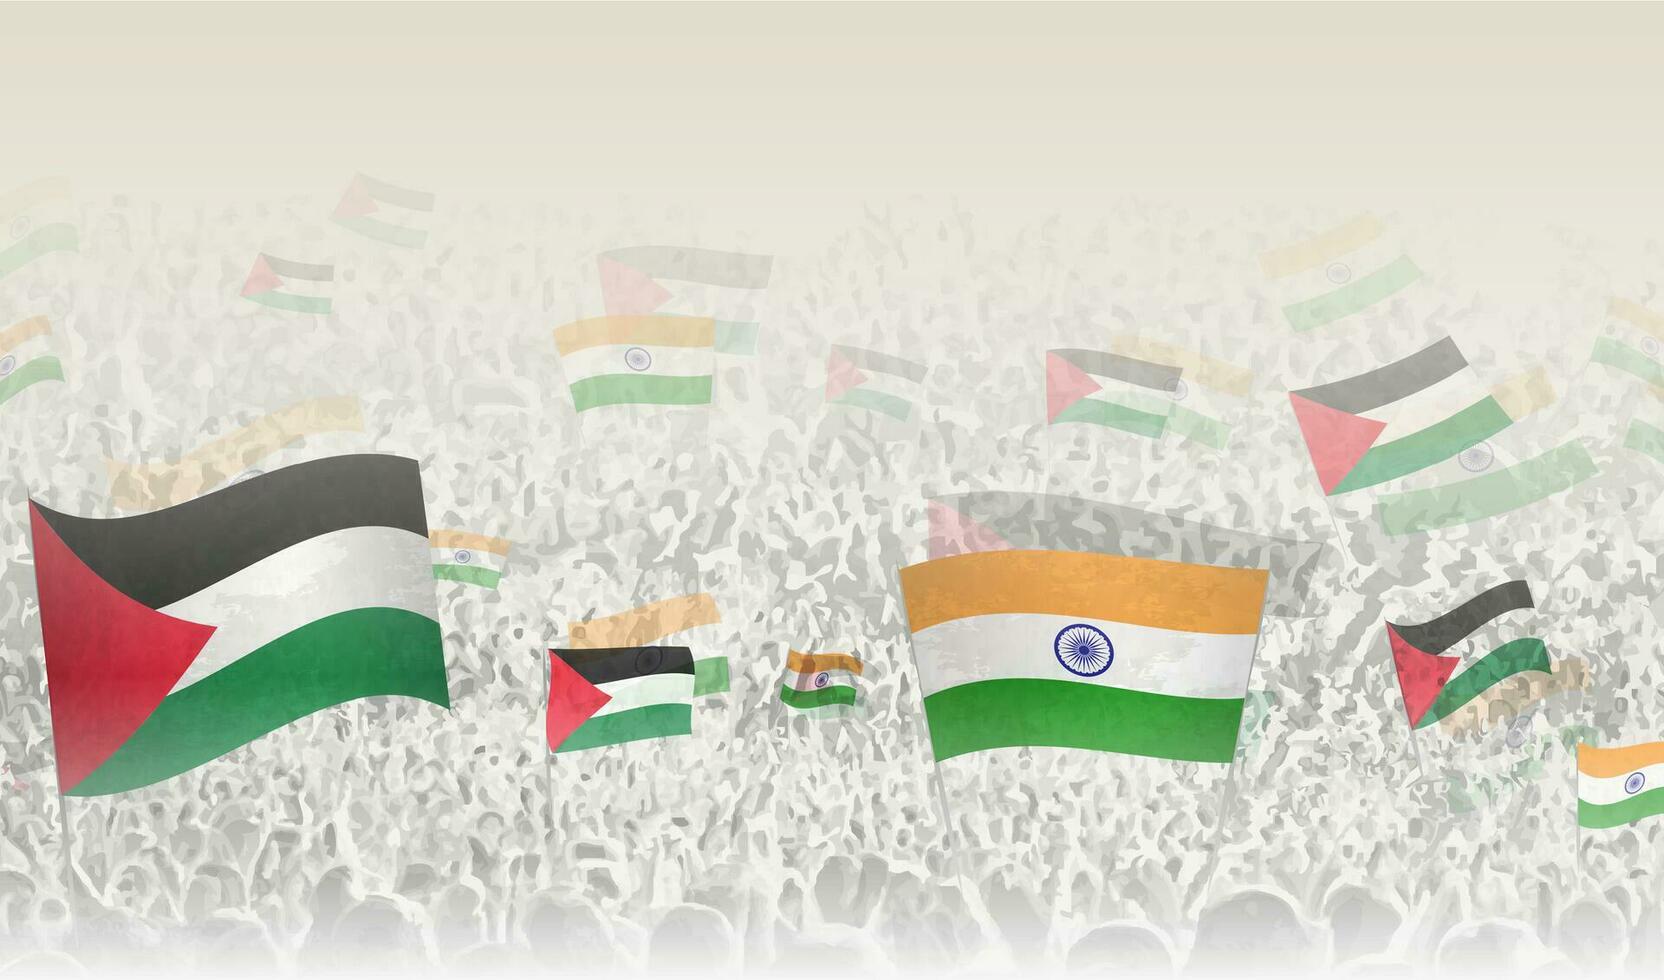 Palestine and India flags in a crowd of cheering people. vector